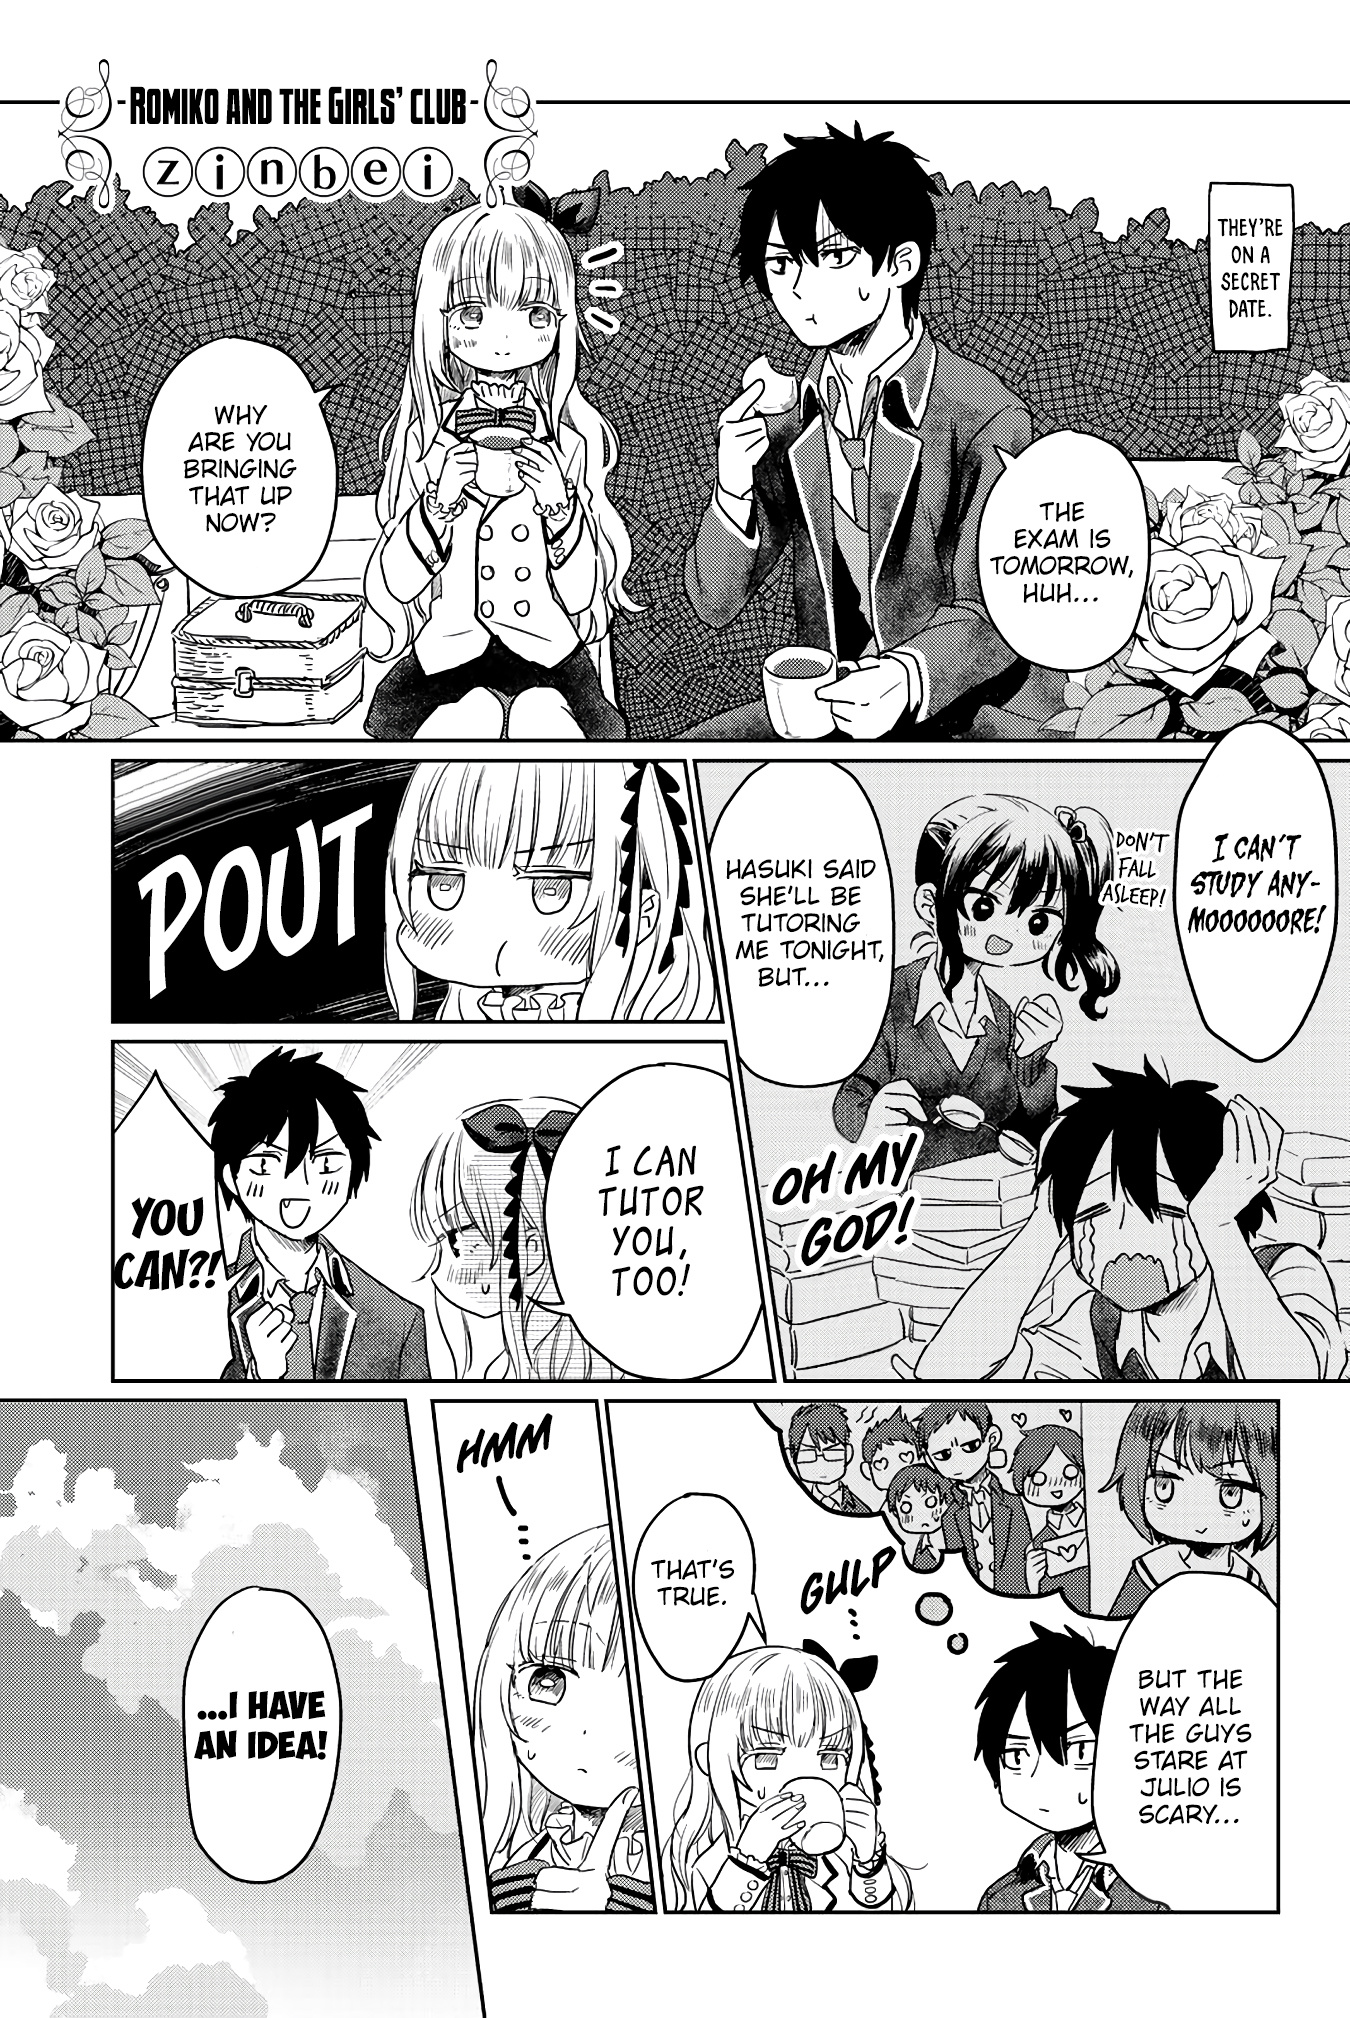 Kishuku Gakkou No Juliet: The Official Anthology Vol.1 Chapter 28: Romiko And The Girls' Club - Picture 2